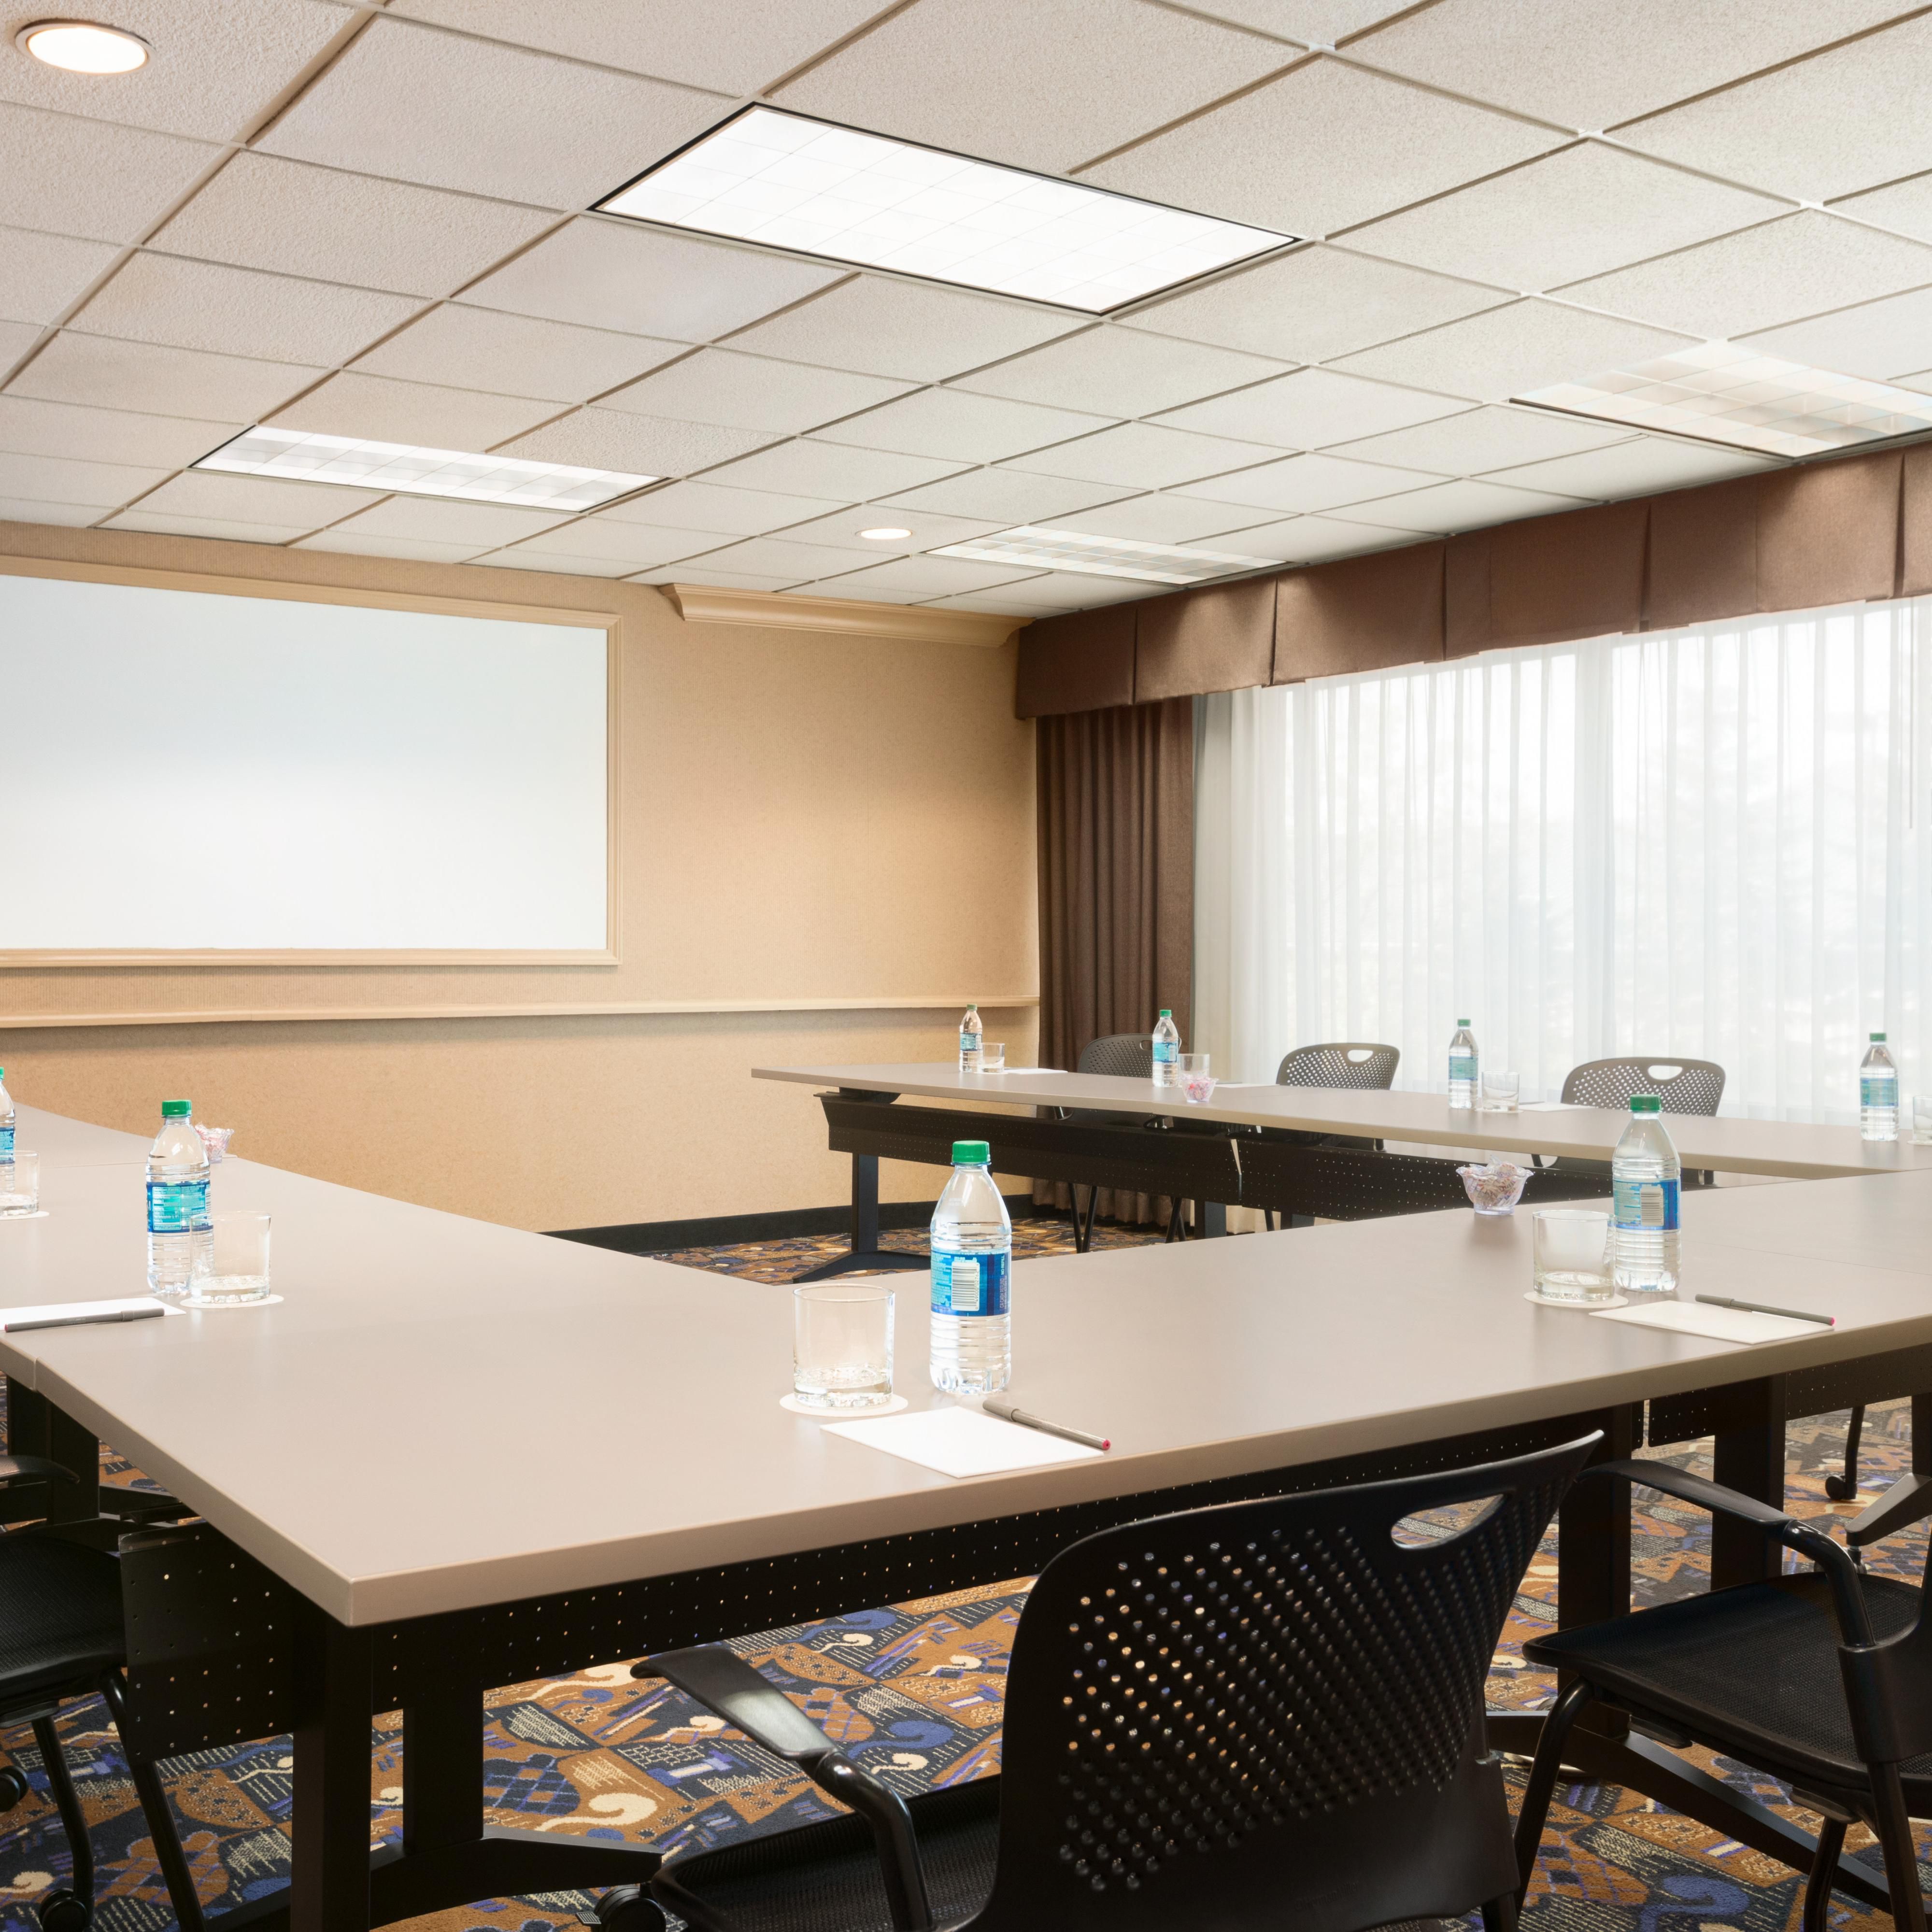 The Auburn E meeting room is flexible for all types of meetings.